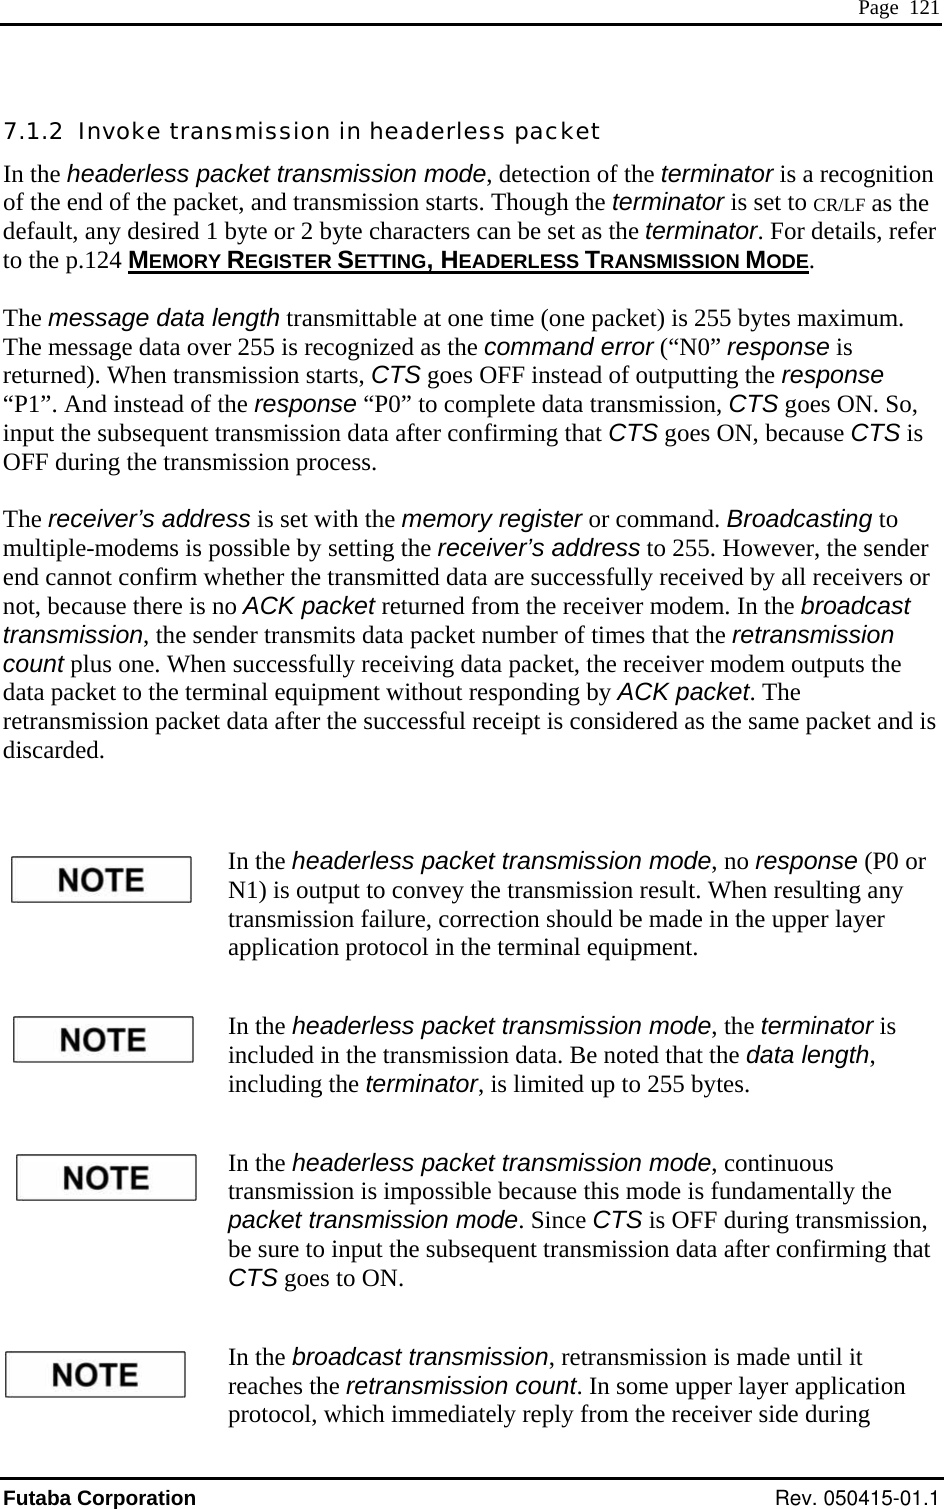  Page  121 7.1.2  InIn the headerless packet transmission mode, detection of the terminator is a recognition of the end of the packet, and transmission starts. Though the terminator is set to CR/LF as the  1  er to the p.124 MEMORY voke transmission in headerless packet  default, any desired byte or 2 byte characters can be set as the terminator. For details, refREGISTER SETTING, HEADERLESS TRANSMISSION MODE.  The message data length transmittable at one time (one packet) is 255 bytes maximum. The message data over 255 is recognized as the command error (“N0” response is ns“P1”. And instead of t , CTS goes ON. So, input the subsequent transmission data after confirming that CTS goes ON, because CTS is OFF during the transmission process. g to  sender ived by all receivers or in the upper layer  sion d the data length, including the terminator, is limited up to 255 bytes. In the headerless packet transmission mode, continuous transmission is impossible because this mode is fundamentally the packet transmission mode. Since CTS is OFF during transmission, be sure to input the subsequent transmission data after confirming that CTS goes to ON. In the broadcast transmission, retransmission is made until it reaches the retransmission count. In some upper layer application protocol, which immediately reply from the receiver side during mission starts, CTS goes OFF instead of outputting the response he response “P0” to complete data transmissionreturned). When tra The receiver’s address is set with the memory register or command. Broadcastinmultiple-modems is possible by setting the receiver’s address to 255. However, theend cannot confirm whether the transmitted data are successfully recenot, because there is no ACK packet returned from the receiver modem. In the broadcast transmission, the sender transmits data packet number of times that the retransmission count plus one. When successfully receiving data packet, the receiver modem outputs the data packet to the terminal equipment without responding by ACK packet. The retransmission packet data after the successful receipt is considered as the same packet and is iscarded. d  In the headerless packet transmission mode, no response (P0 or N1) is output to convey the transmission result. When resulting any transmission failure, correction should be made application protocol in the terminal equipment. In the headerless packet transmission mode, the terminator isincluded in the transmis ata. Be noted that Futaba Corporation Rev. 050415-01.1 